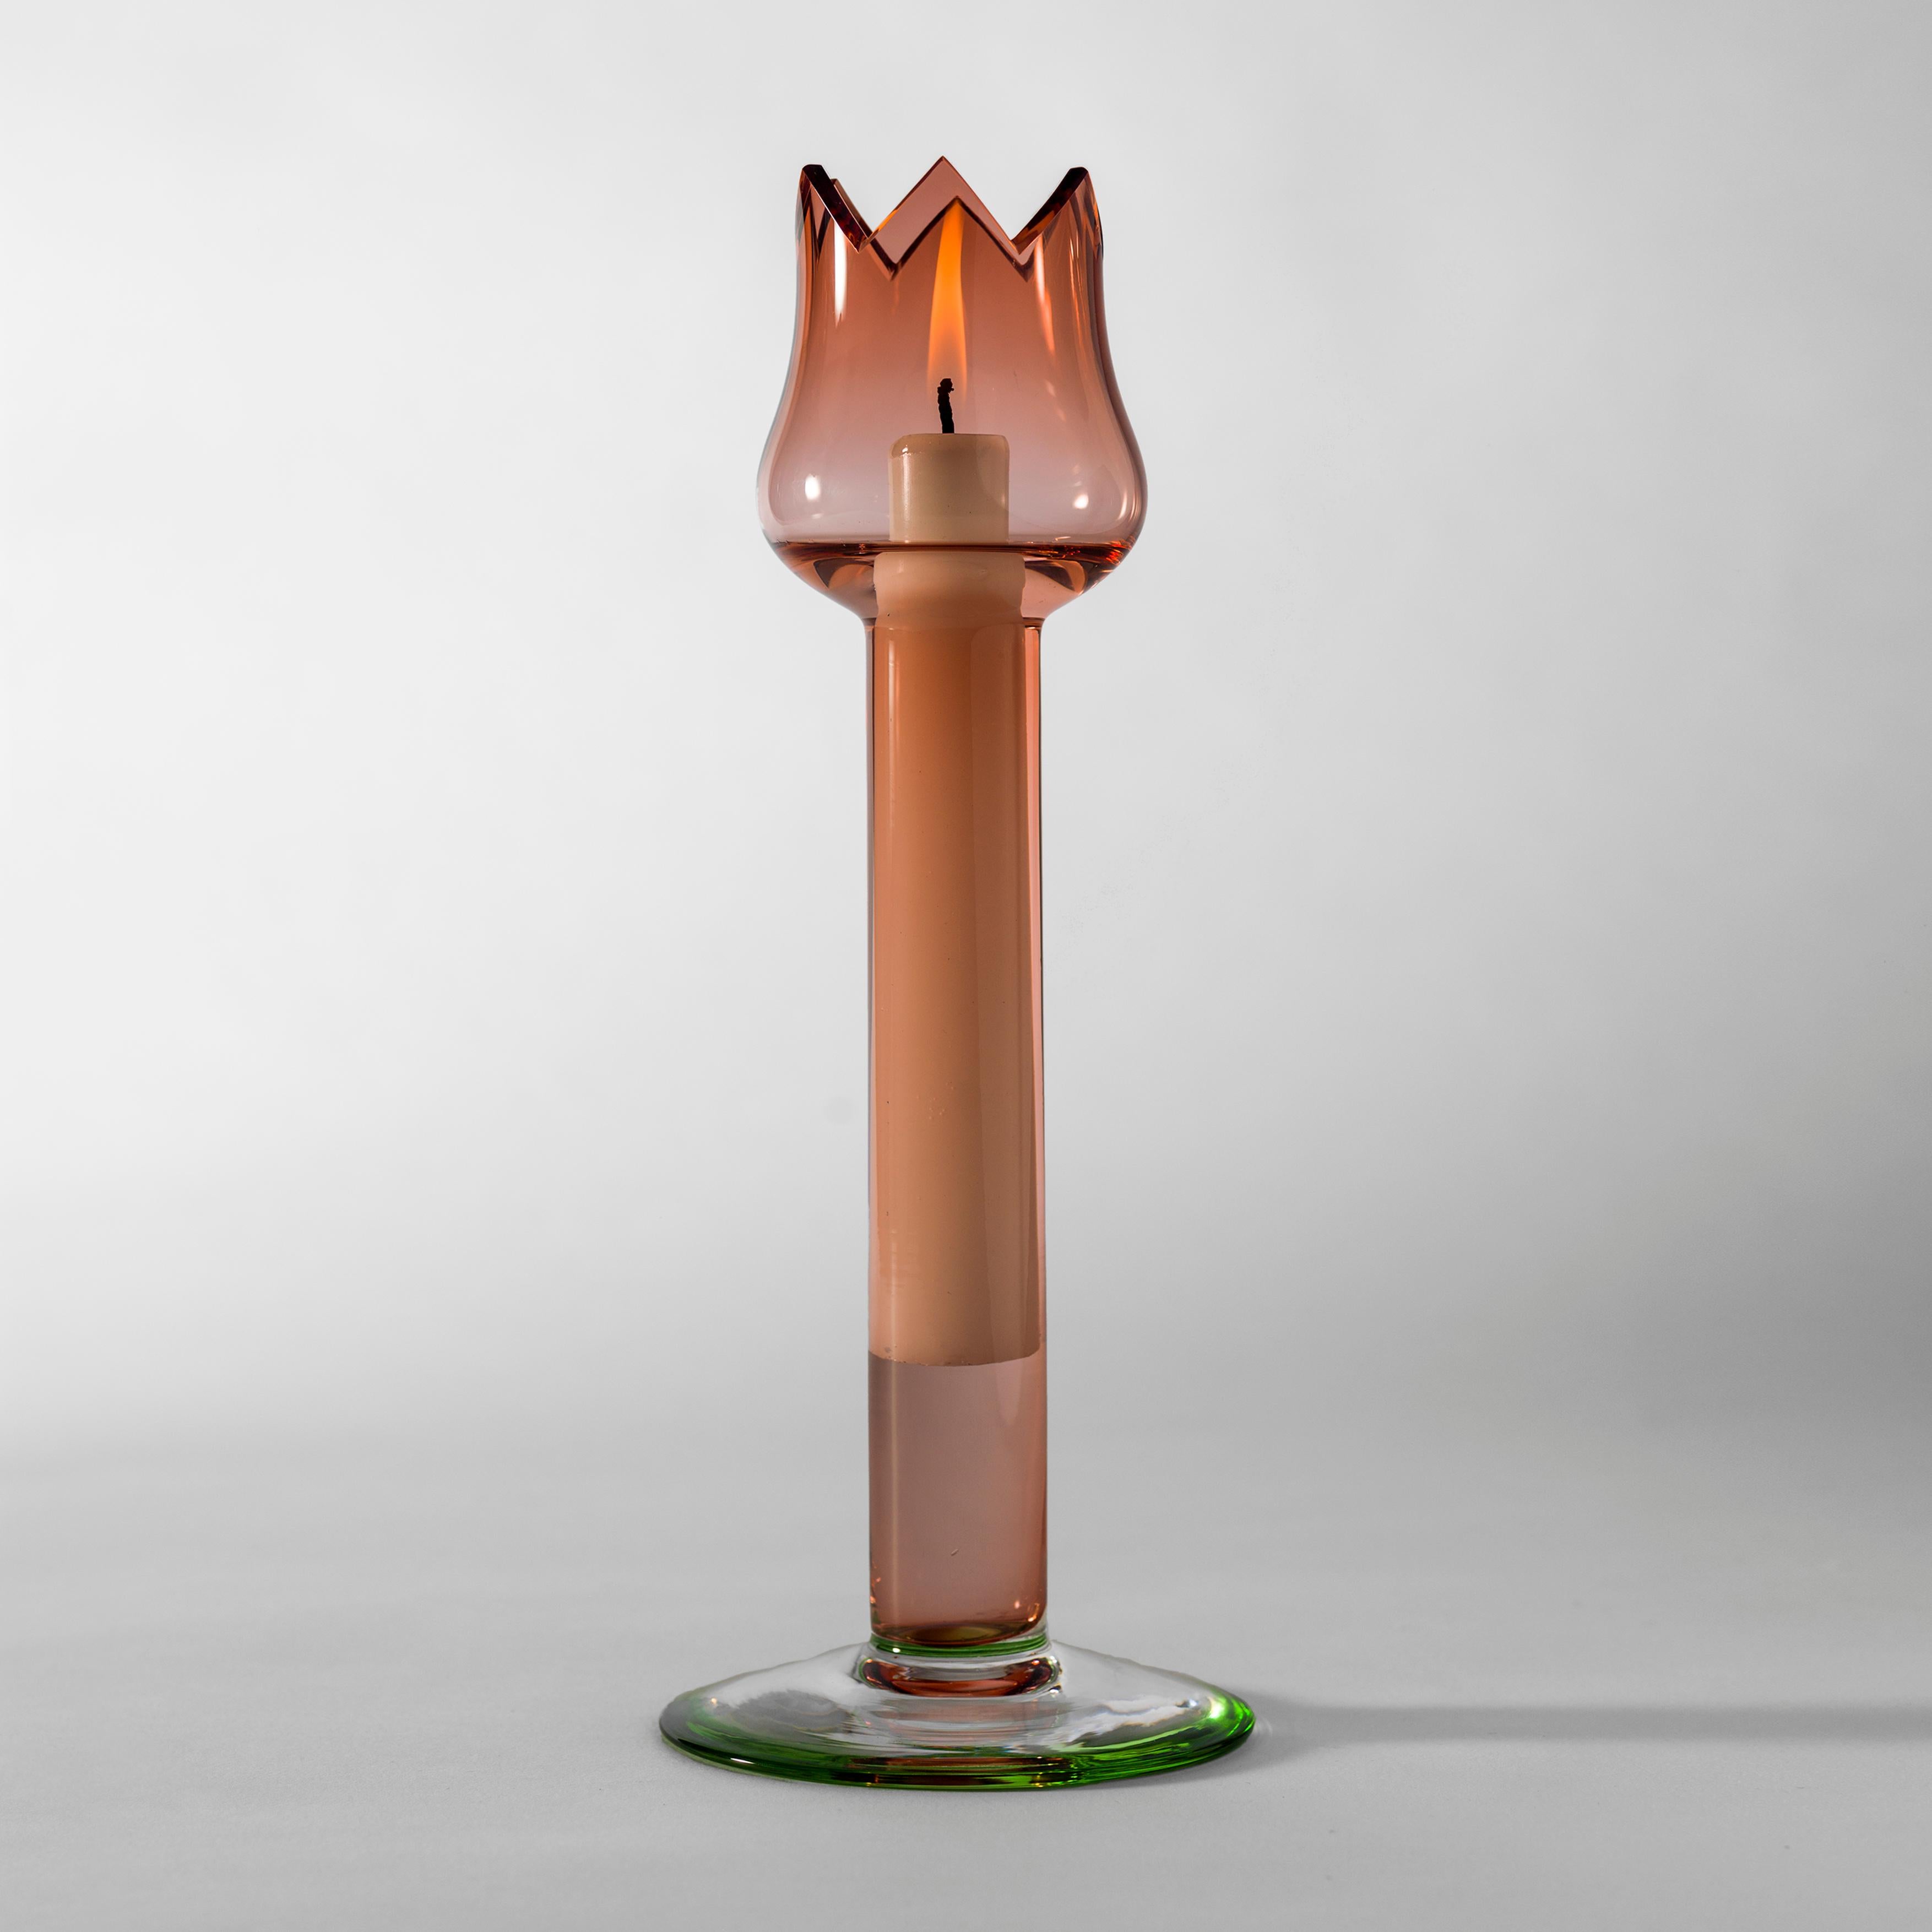 Red tulip candleholder by Oscar Tusquets
candleholder where the candle floats and the flame burns behind the red corolla.

Measure: 11 x 29.